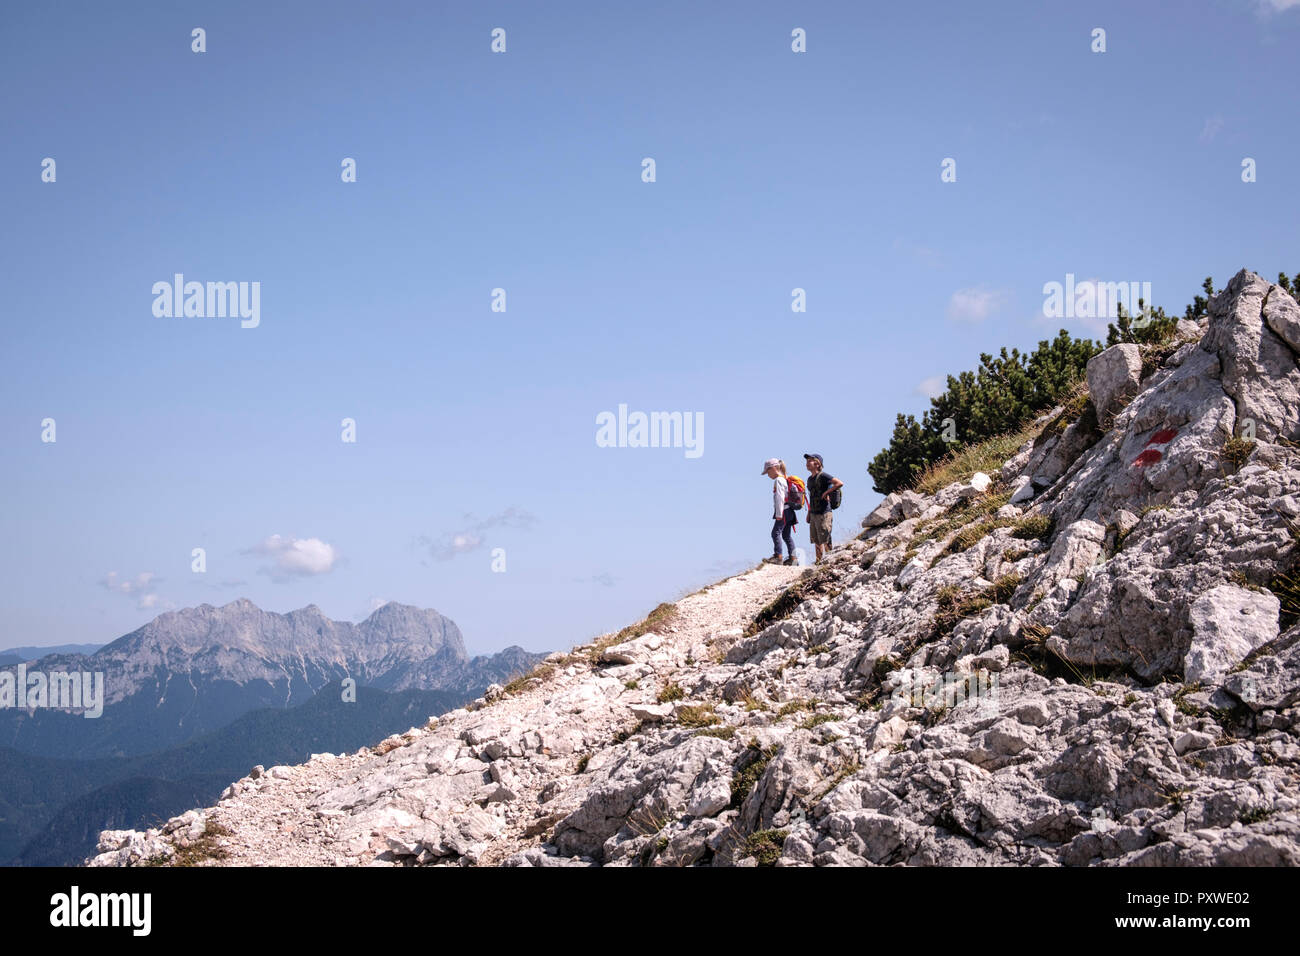 Austria, Salzburg State, Loferer Steinberge, brother and sister on a hiking trip in the mountains Stock Photo